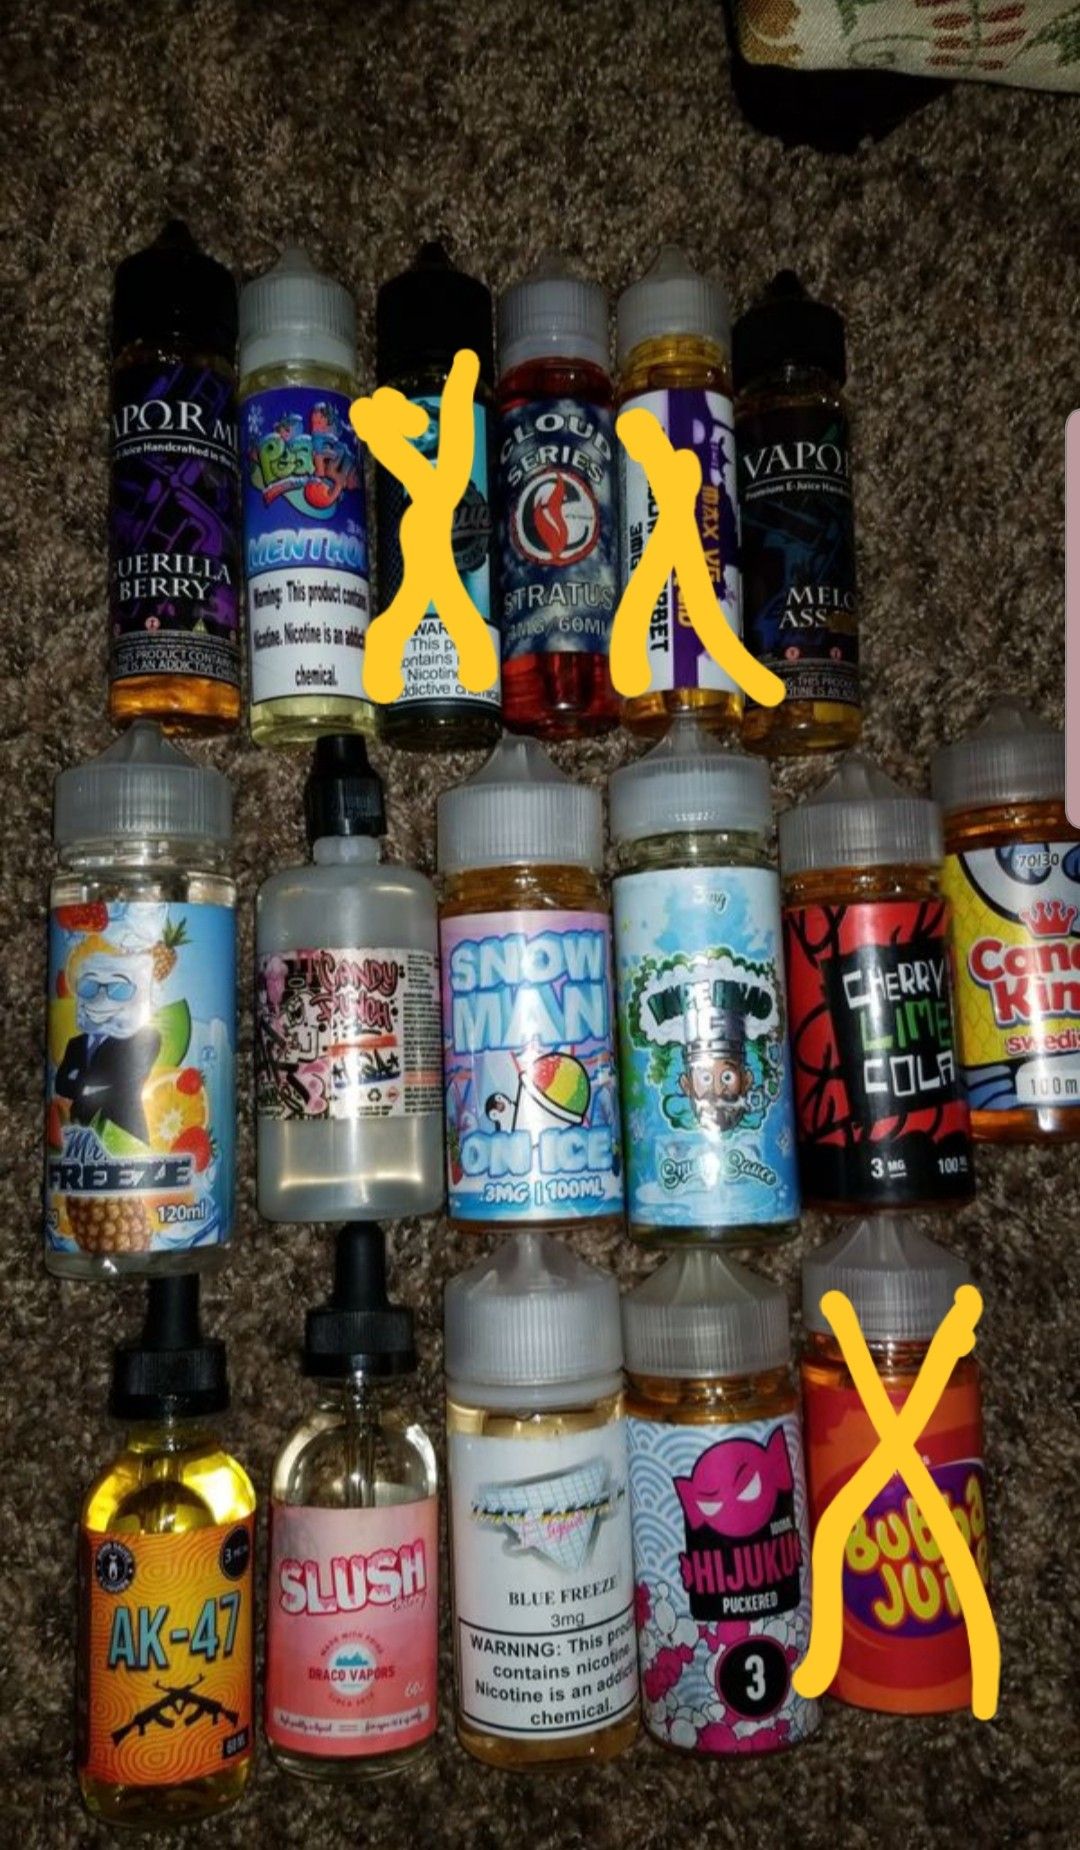 Mods and juices!!